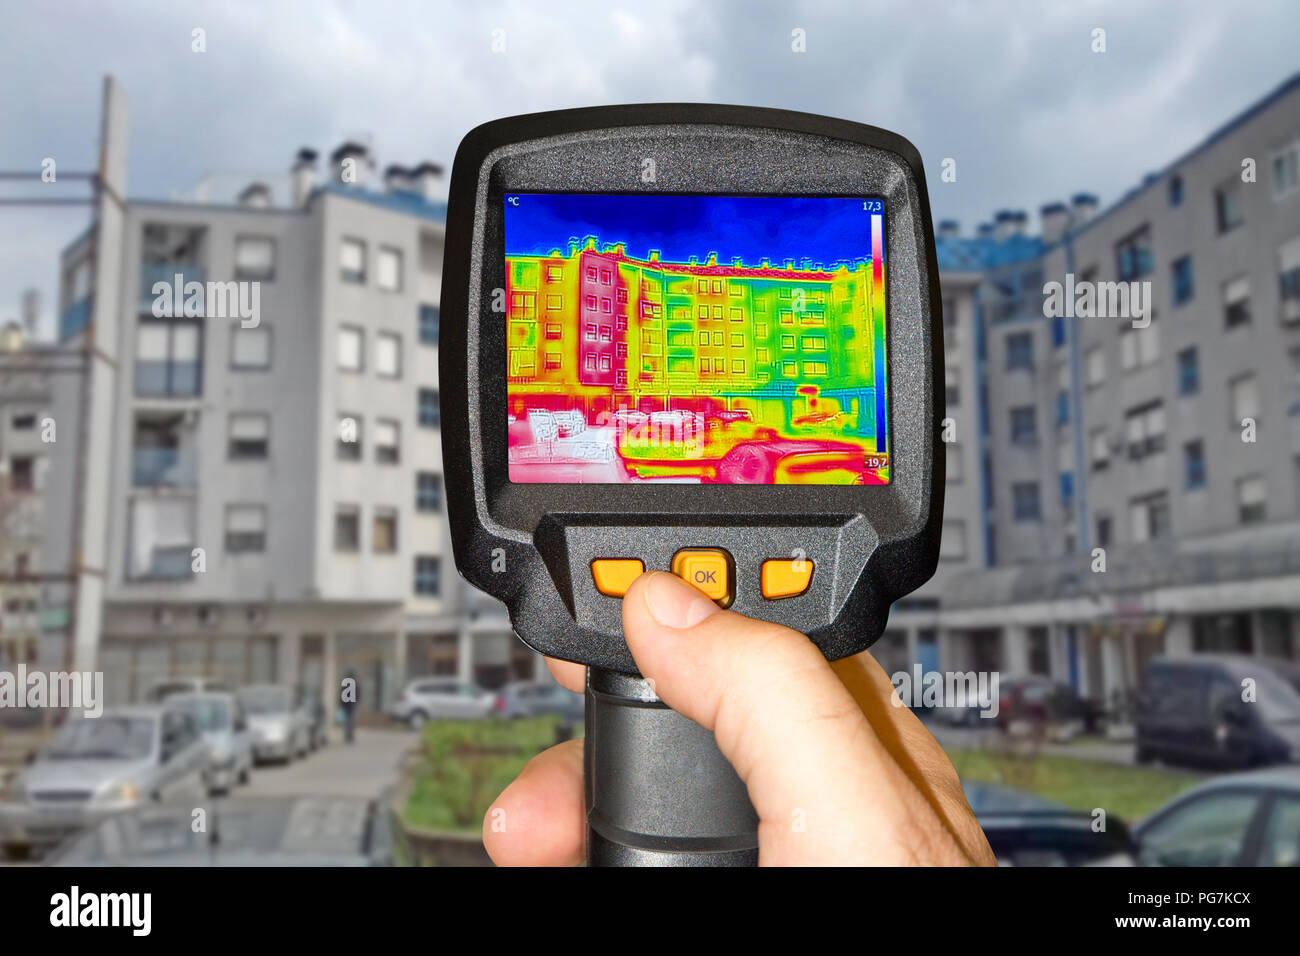 Detecting Heat Loss Outside building Using Infrared Thermal Camera Stock Photo